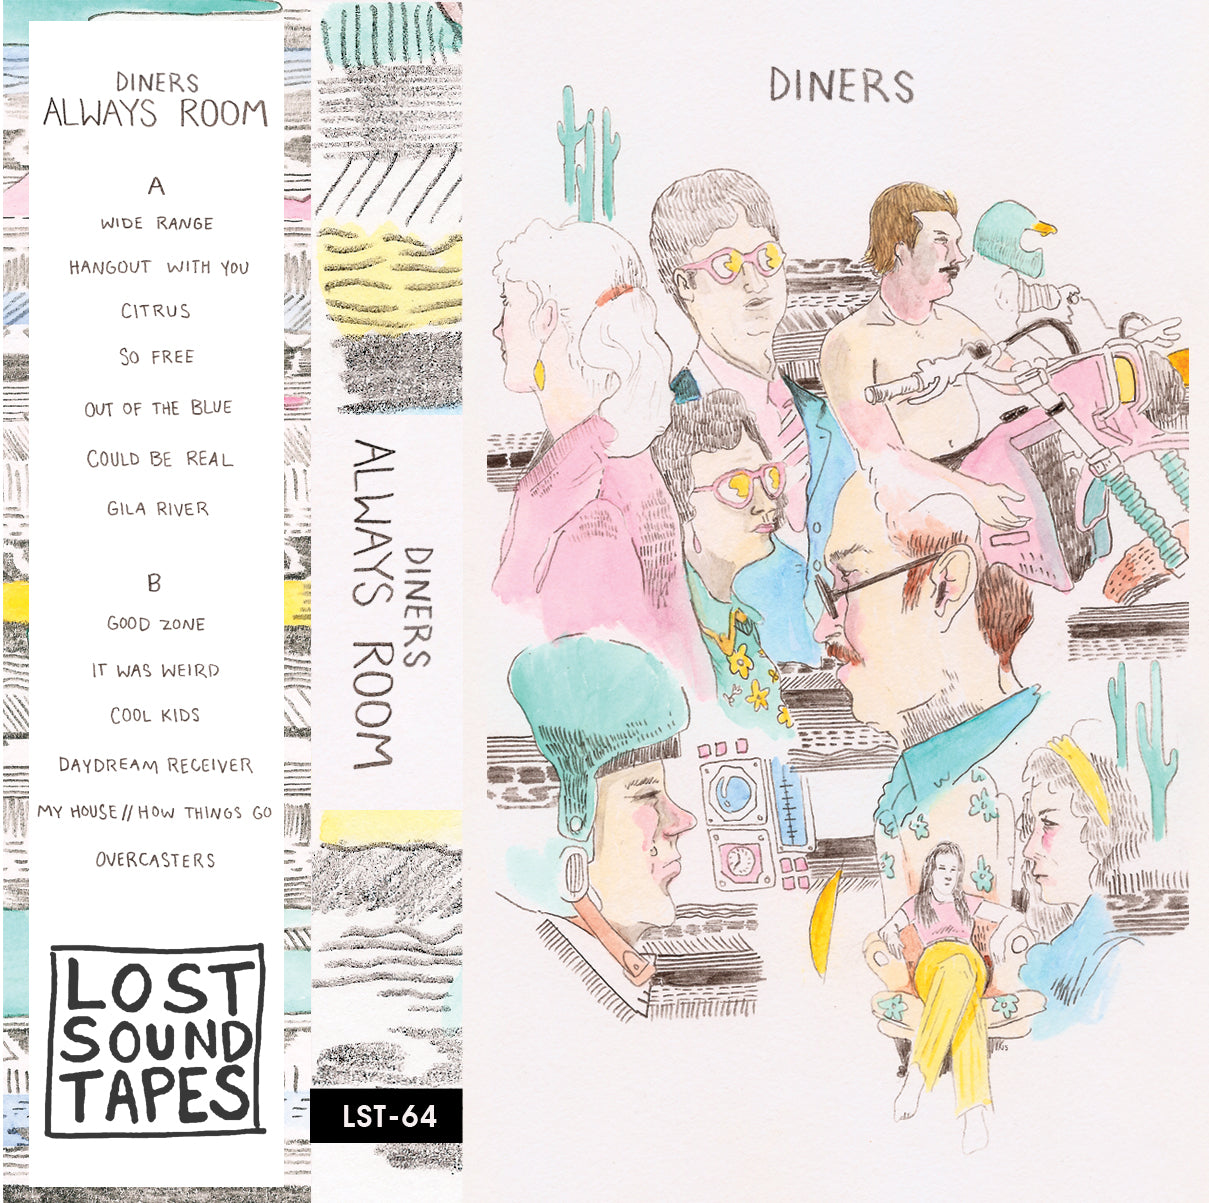 DINERS "Always Room" cassette tape